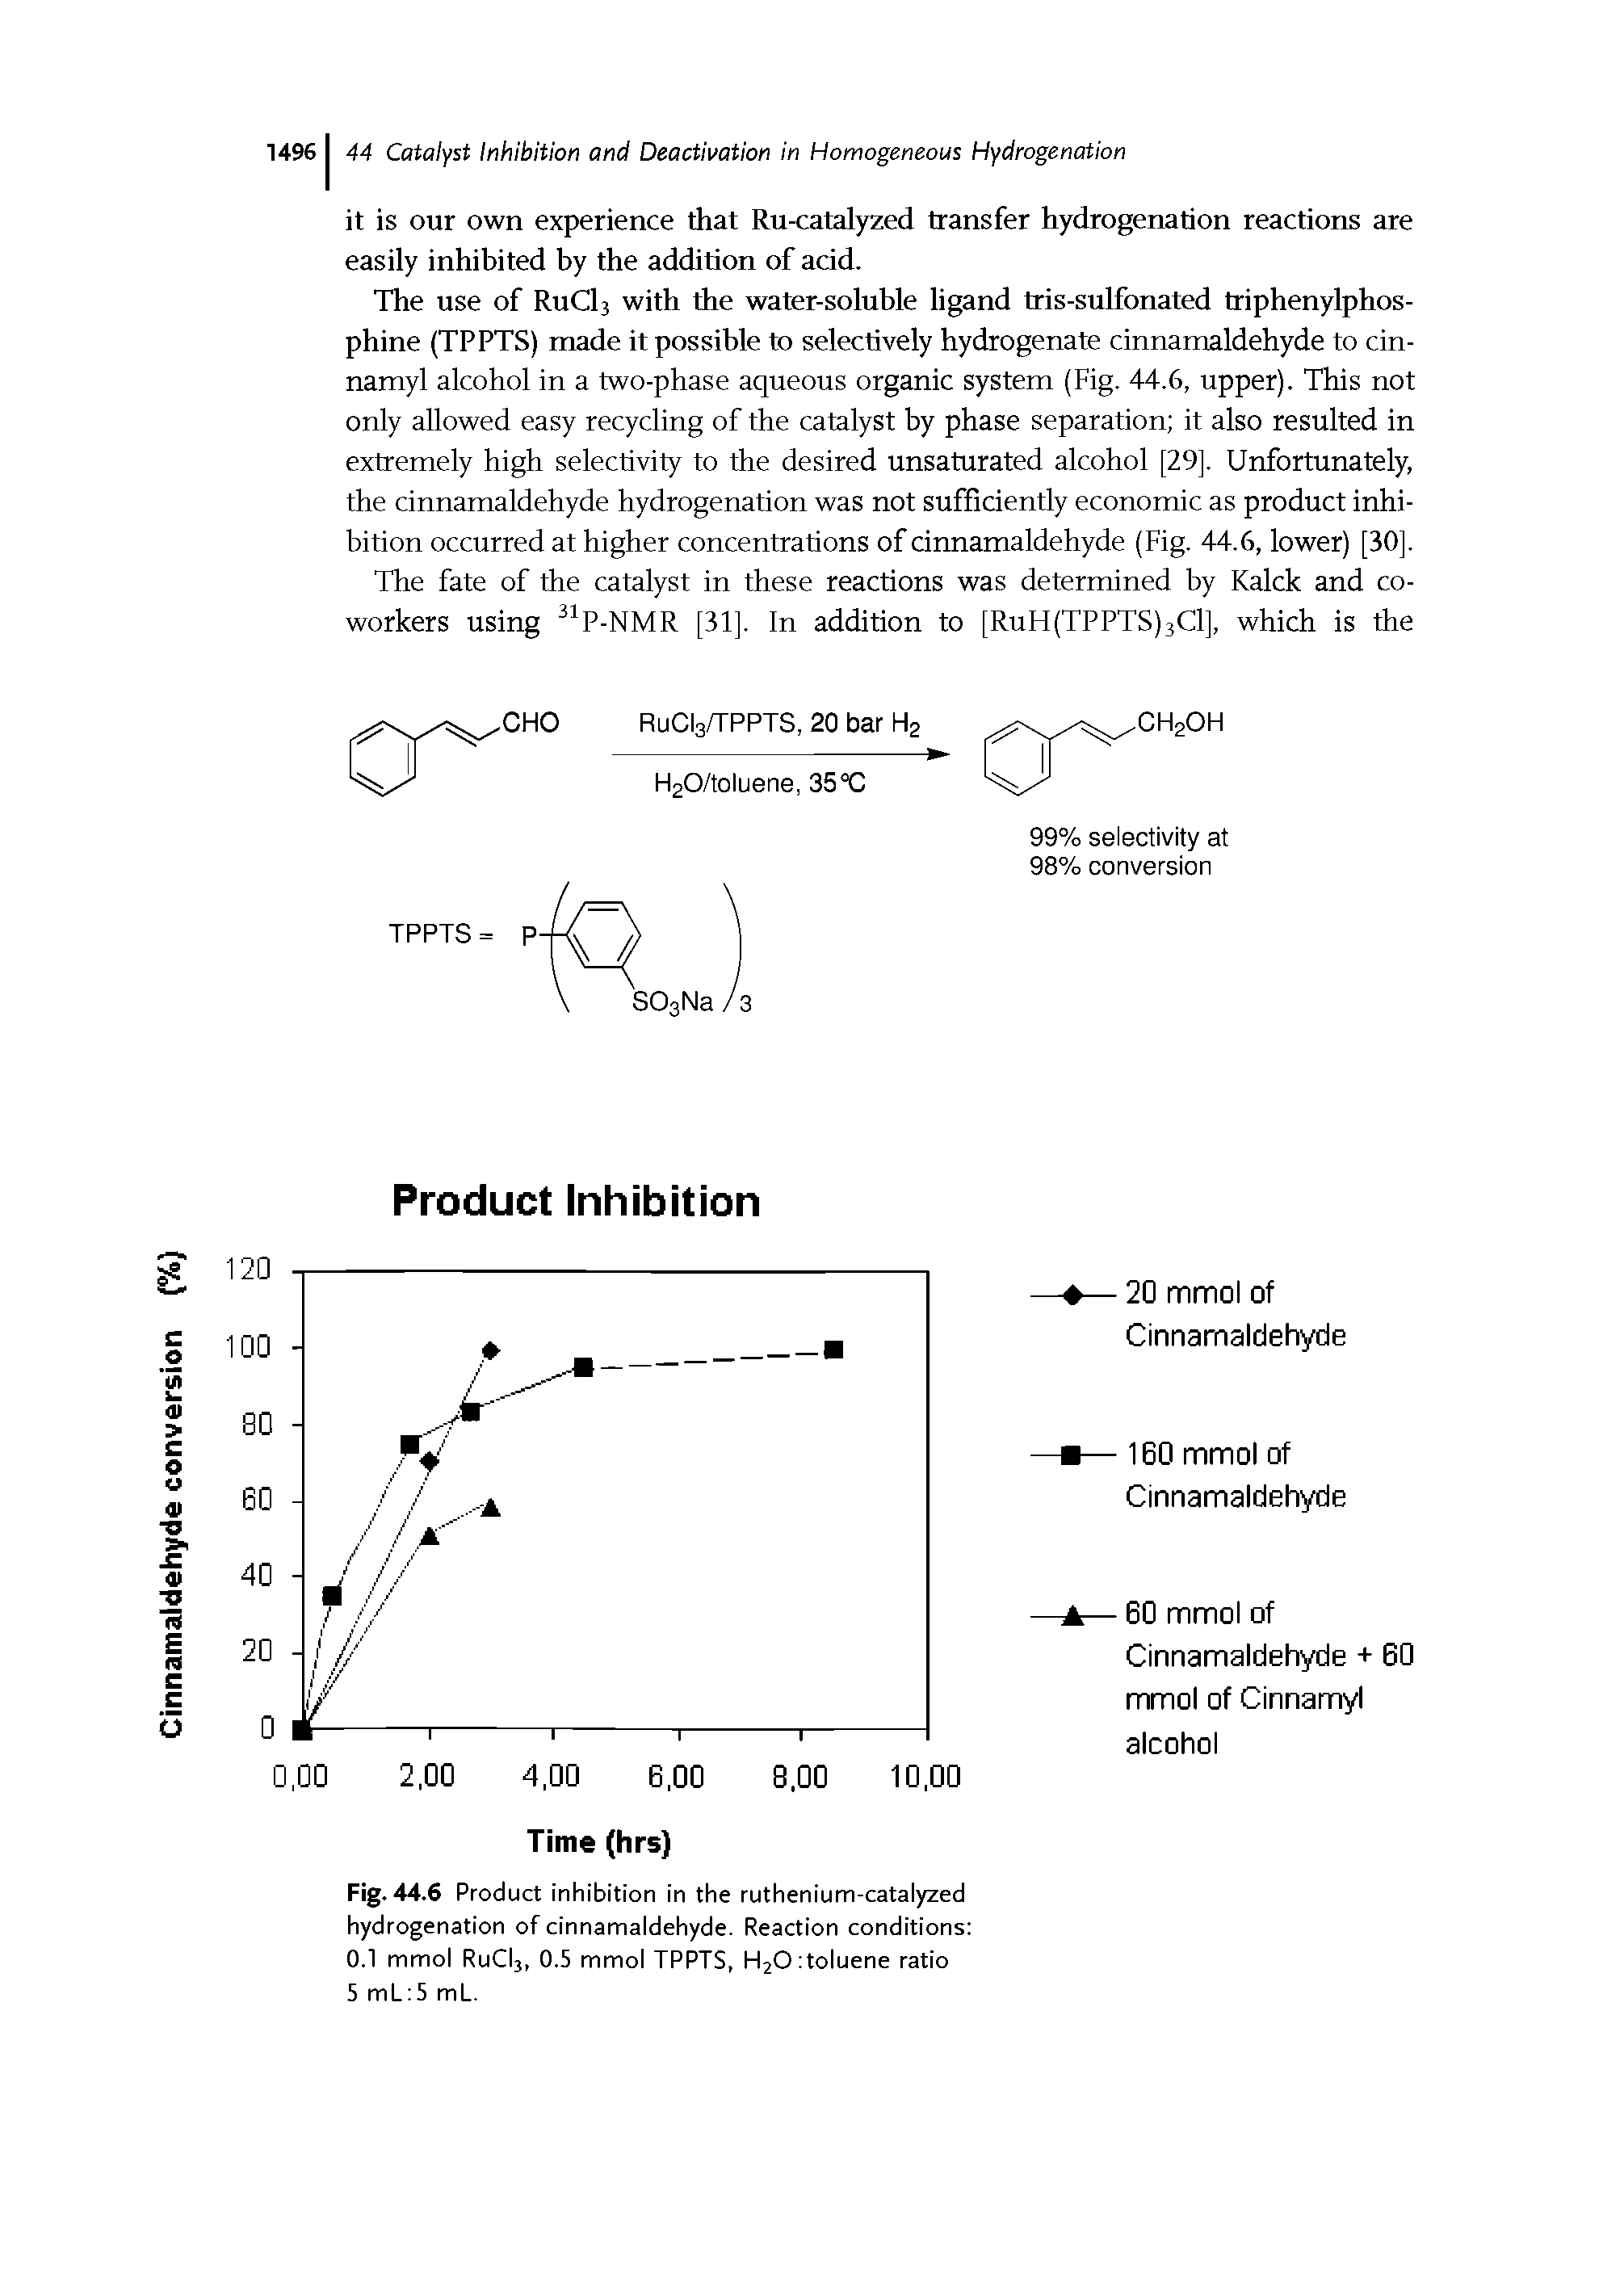 Fig. 44.6 Product inhibition in the ruthenium-catalyzed hydrogenation of cinnamaldehyde. Reaction conditions 0.1 mmol RuCI3, 0.5 mmol TPPTS, H20 Toluene ratio 5 mL 5 mL.